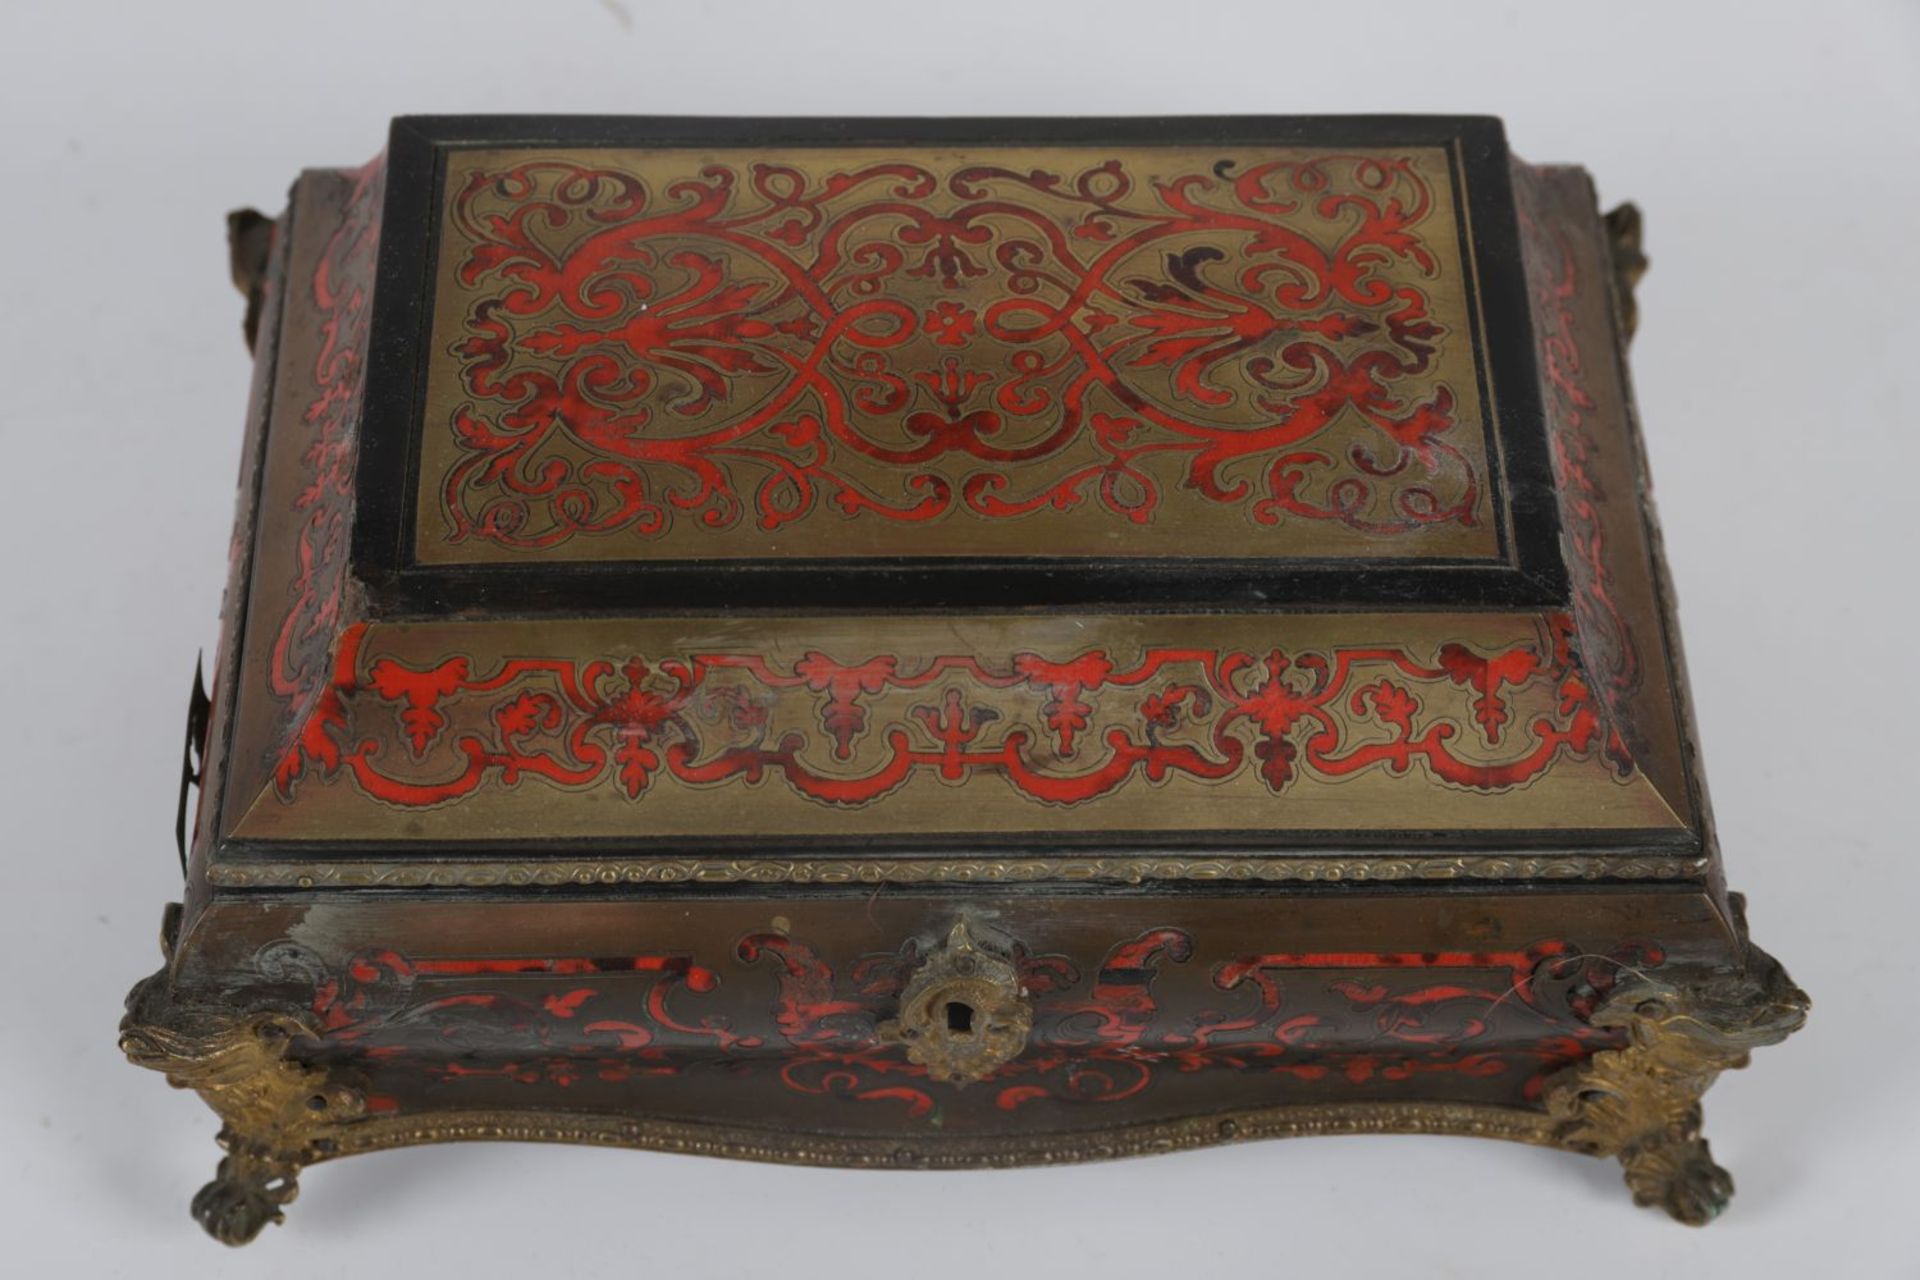 19TH-CENTURY FRENCH BUHL JEWELLERY BOX - Image 2 of 3